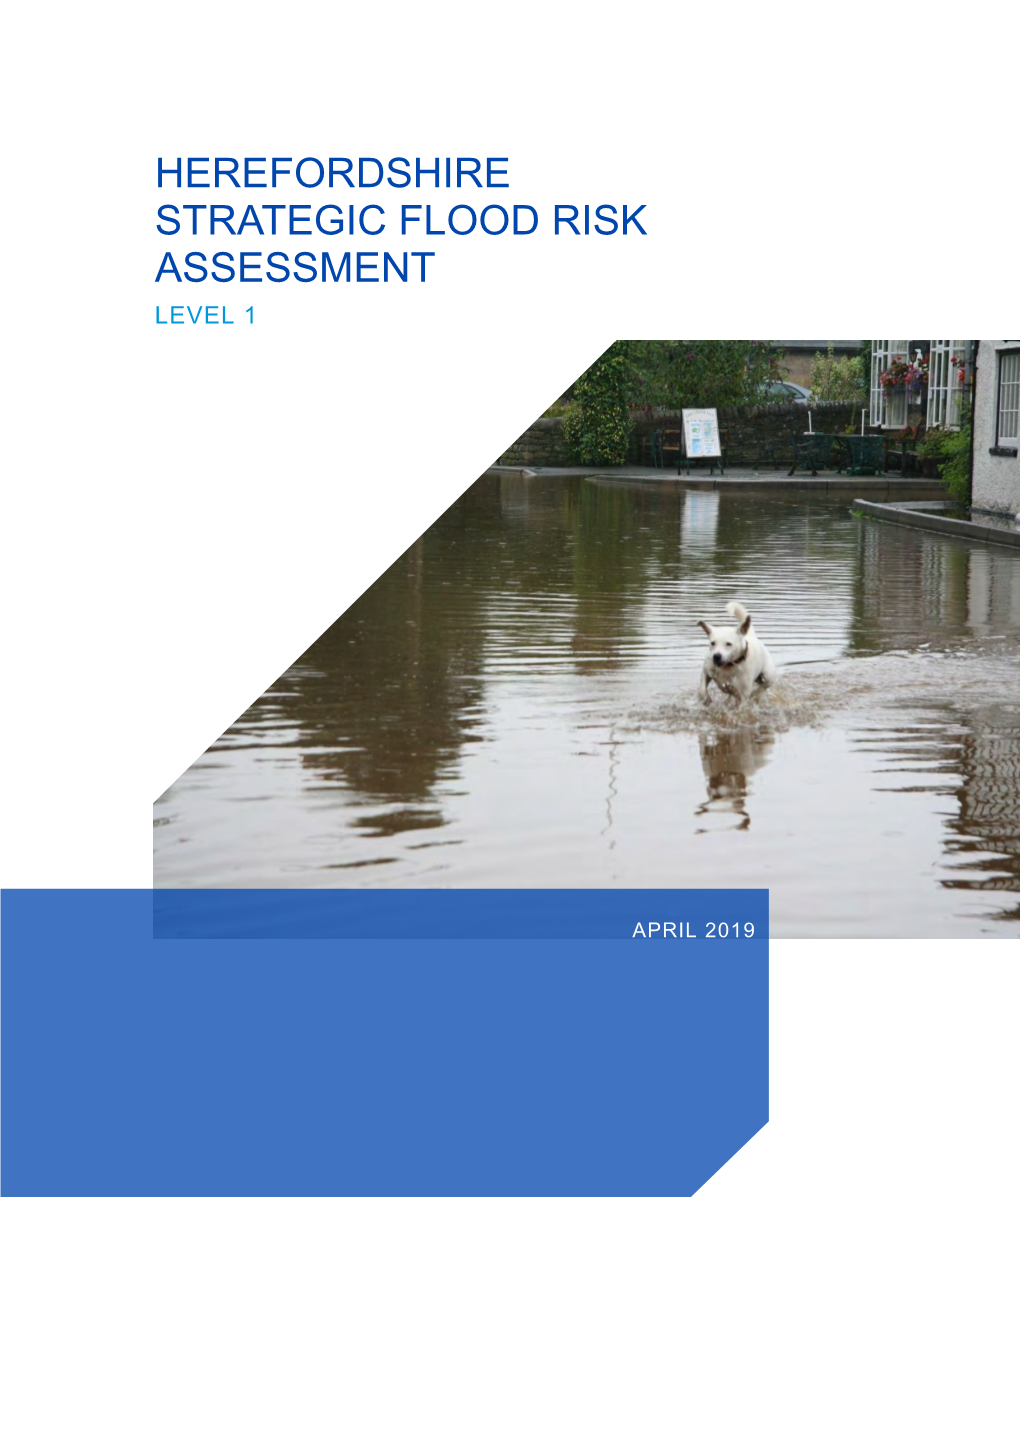 Level 1 Strategic Flood Risk Assessment (SFRA) Has Been Prepared on Behalf of Herefordshire Council to Update the Level 1 SFRA Published in 2009